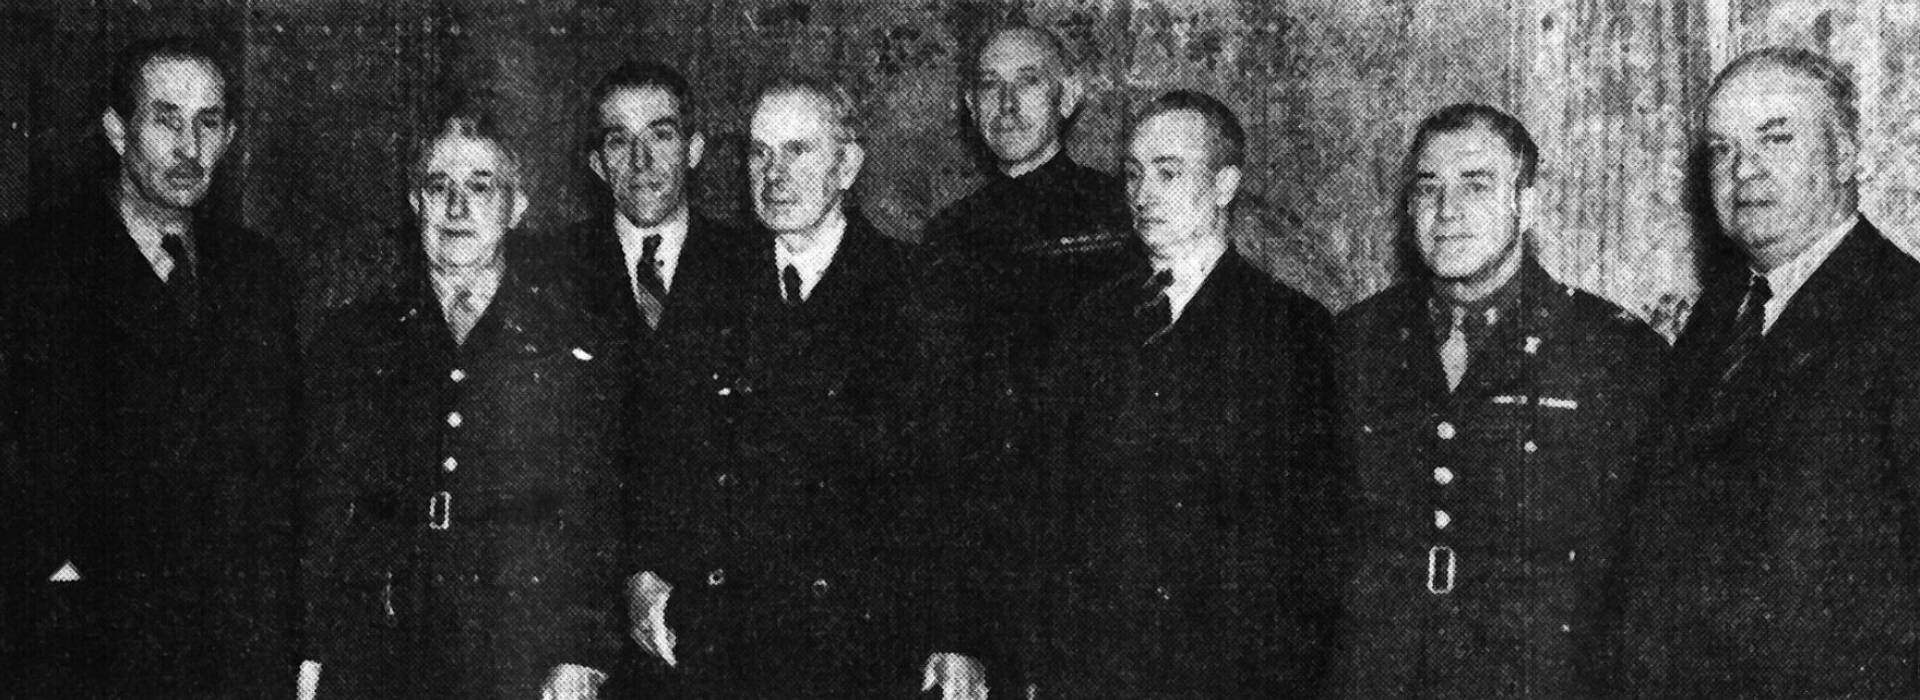 Representatives from industry, politics, and the United States military gathered at the premiere of Brian Desmond Hurst's 'A Letter From Ulster' at the Imperial Picture House, Belfast on 12th January 1943.